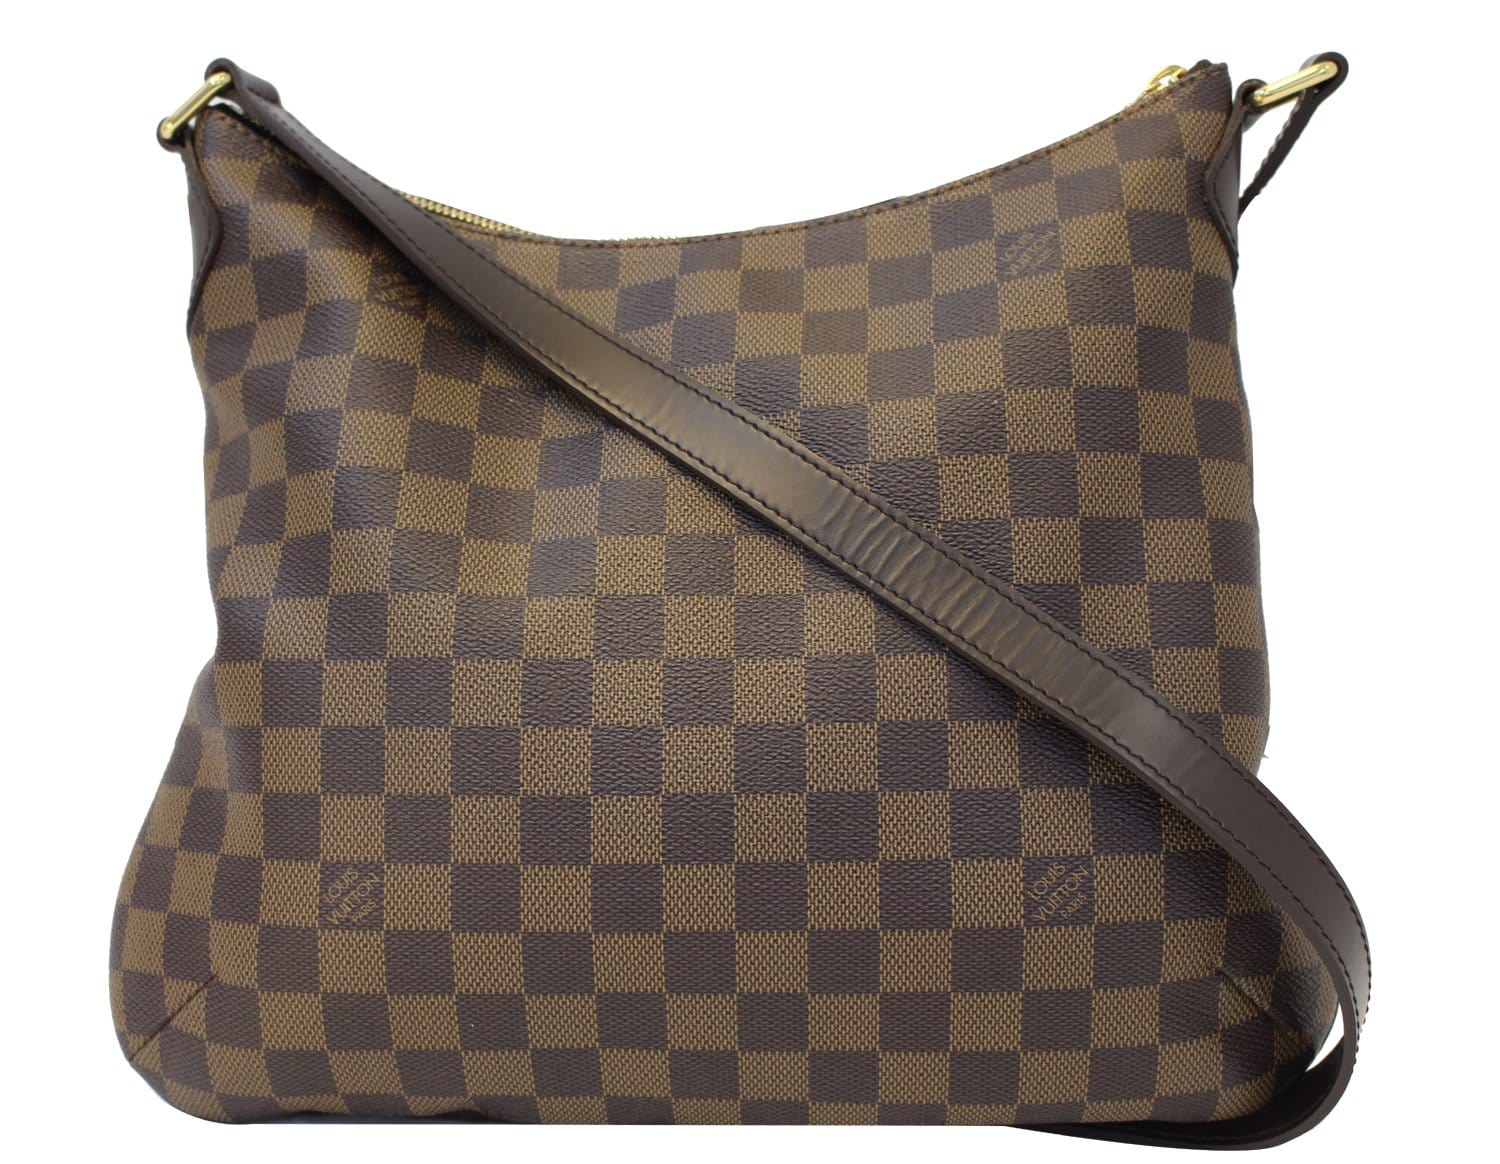 Check out my avail listing in my closet  Louis vuitton accessories, Vuitton,  Lv bag